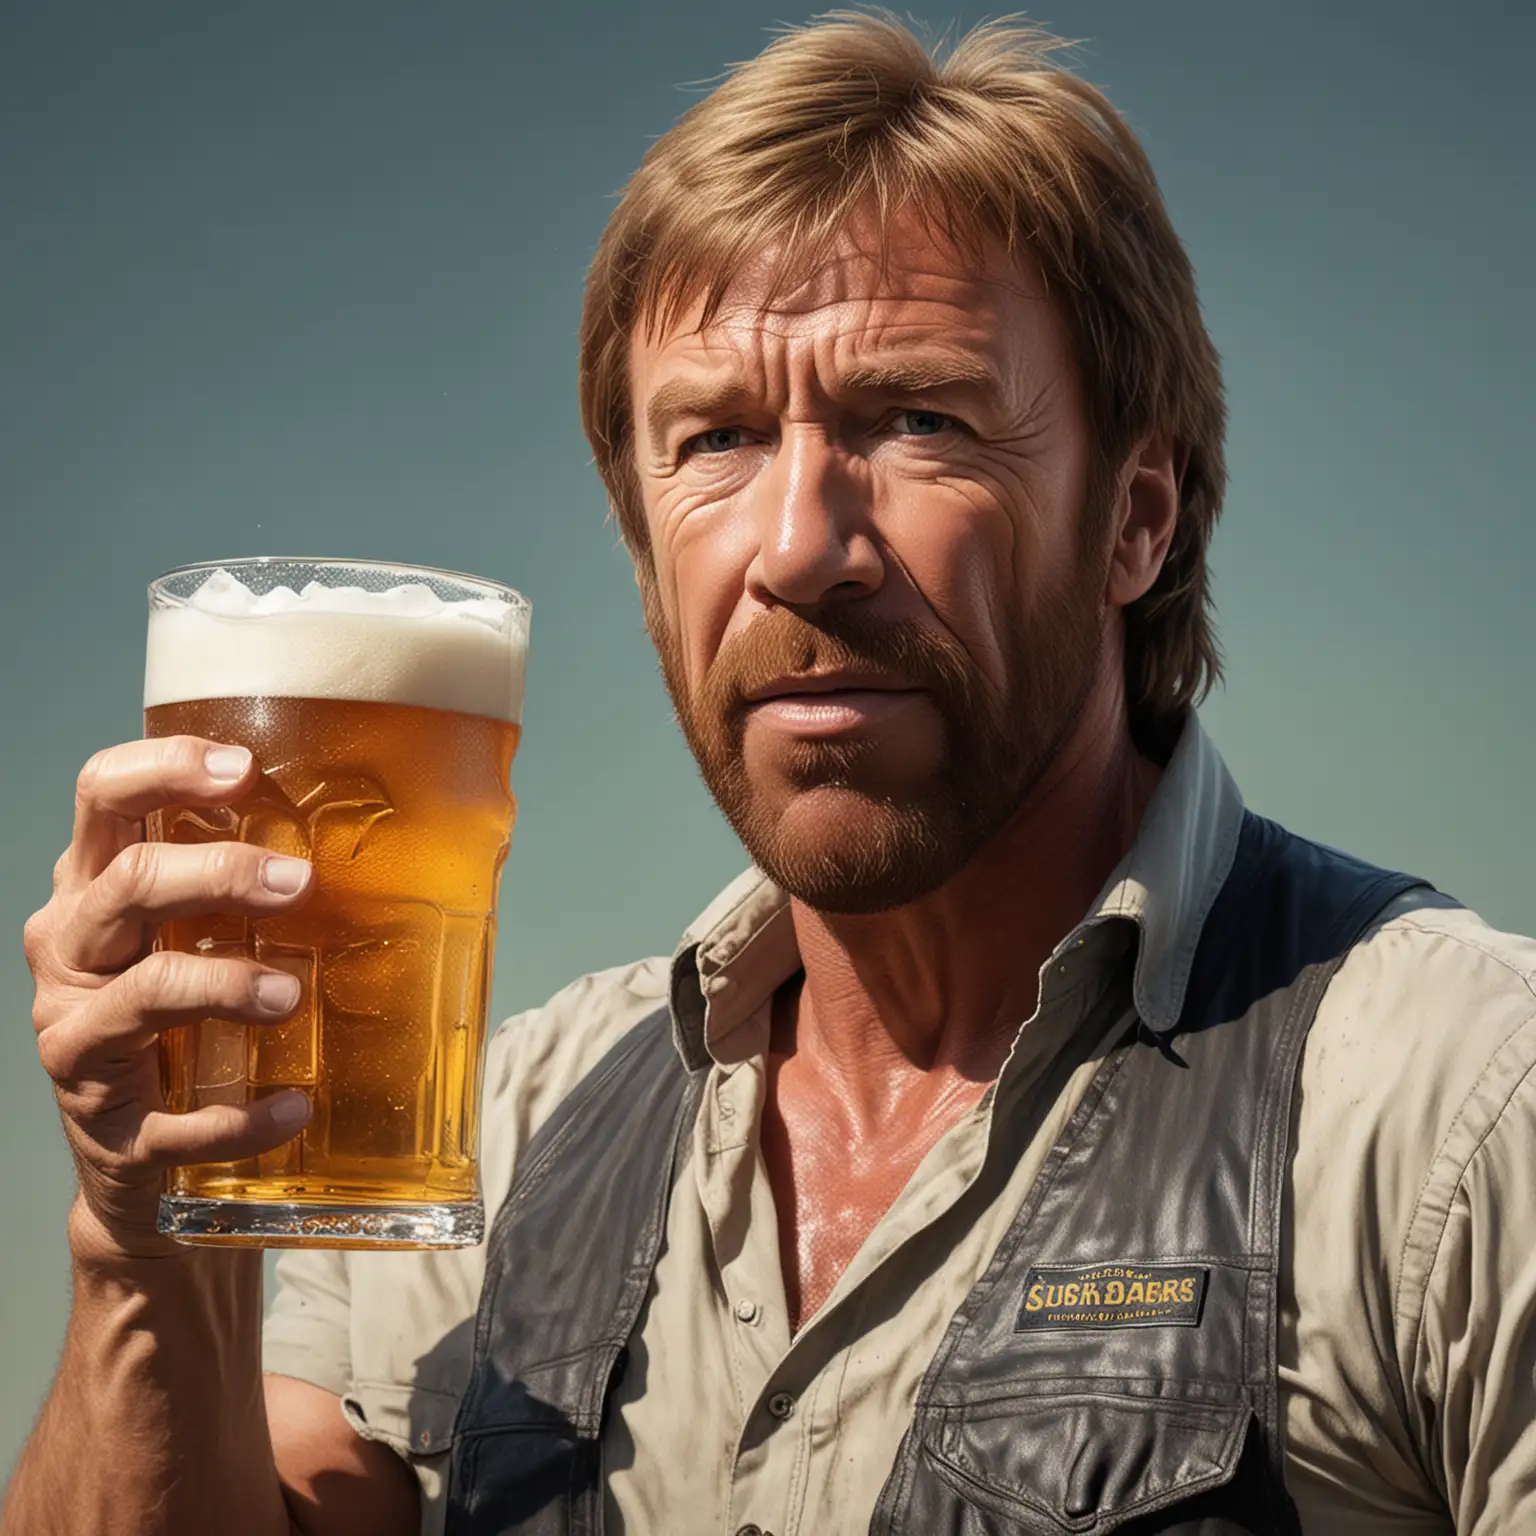 create a realistic image of Chuck Norris drinking a large ice cold draft beer on a hot summer day